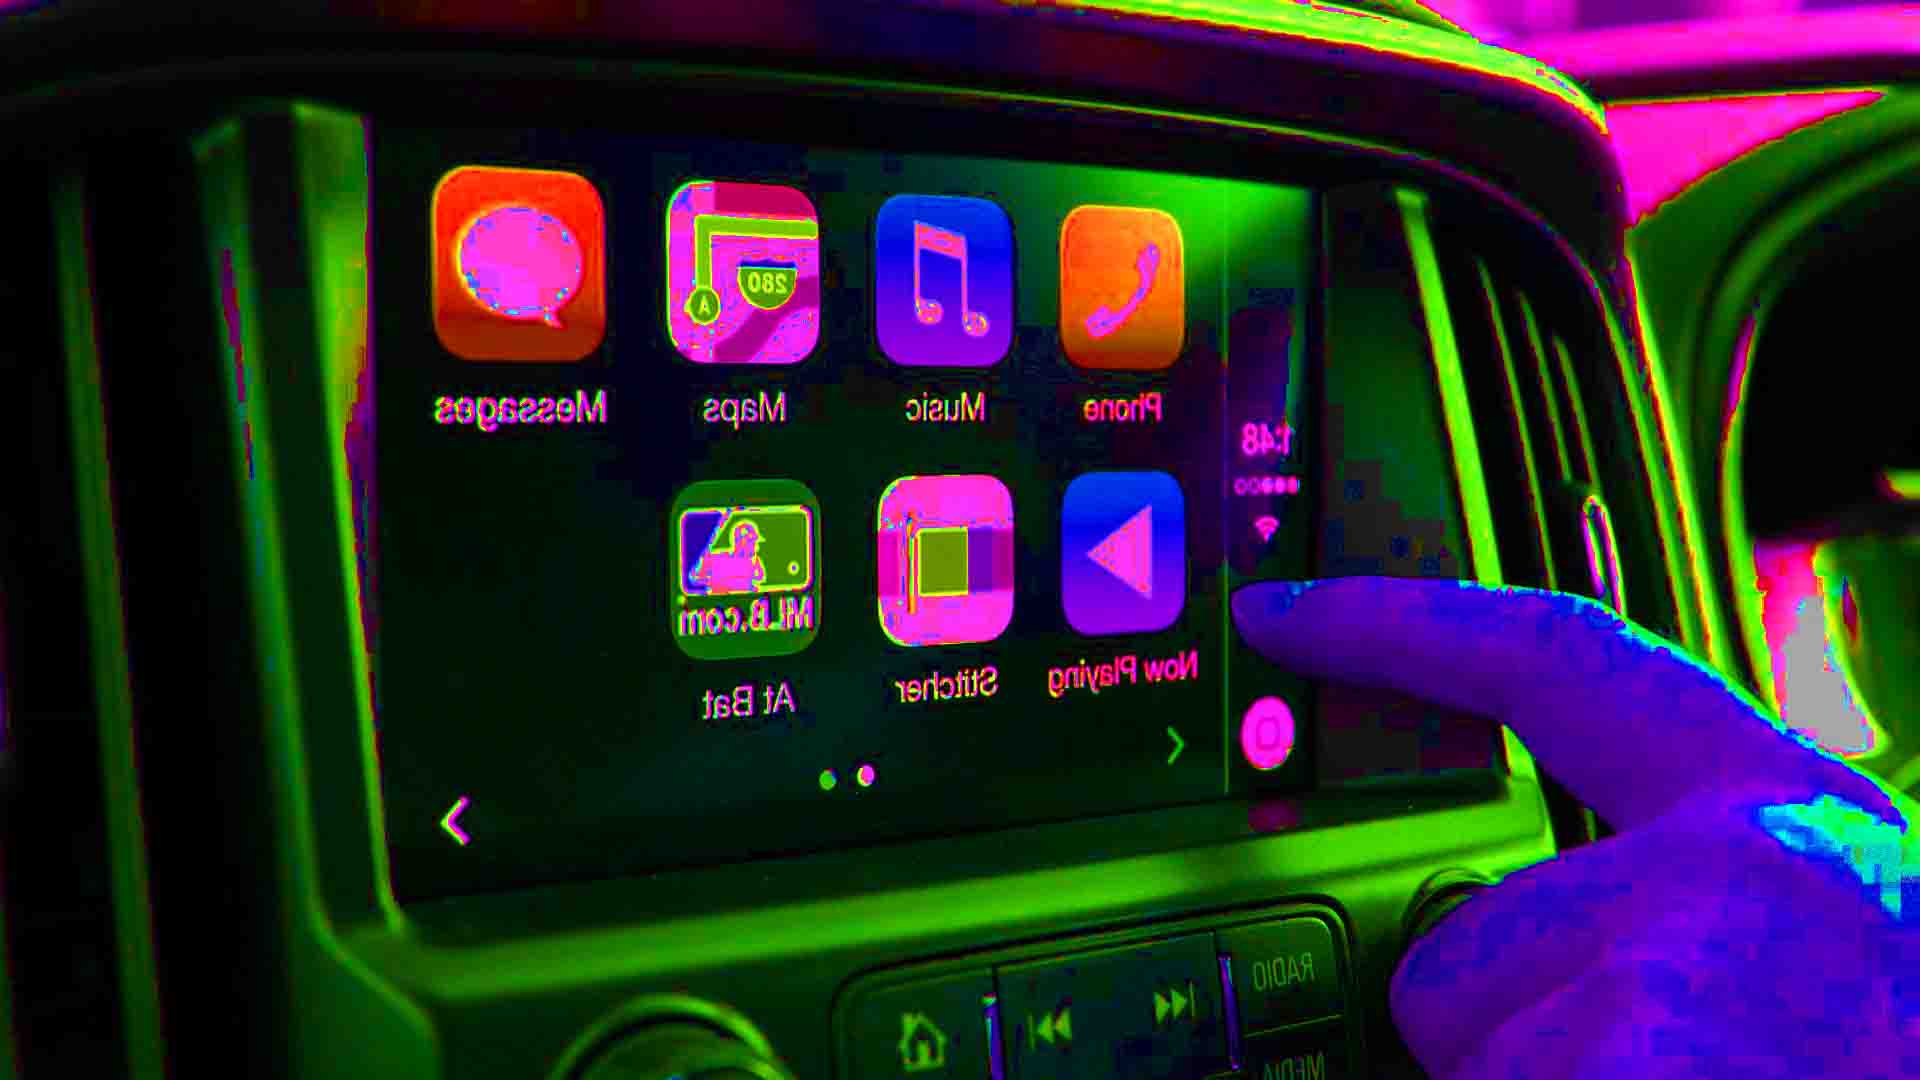 Do you want to use Android Auto